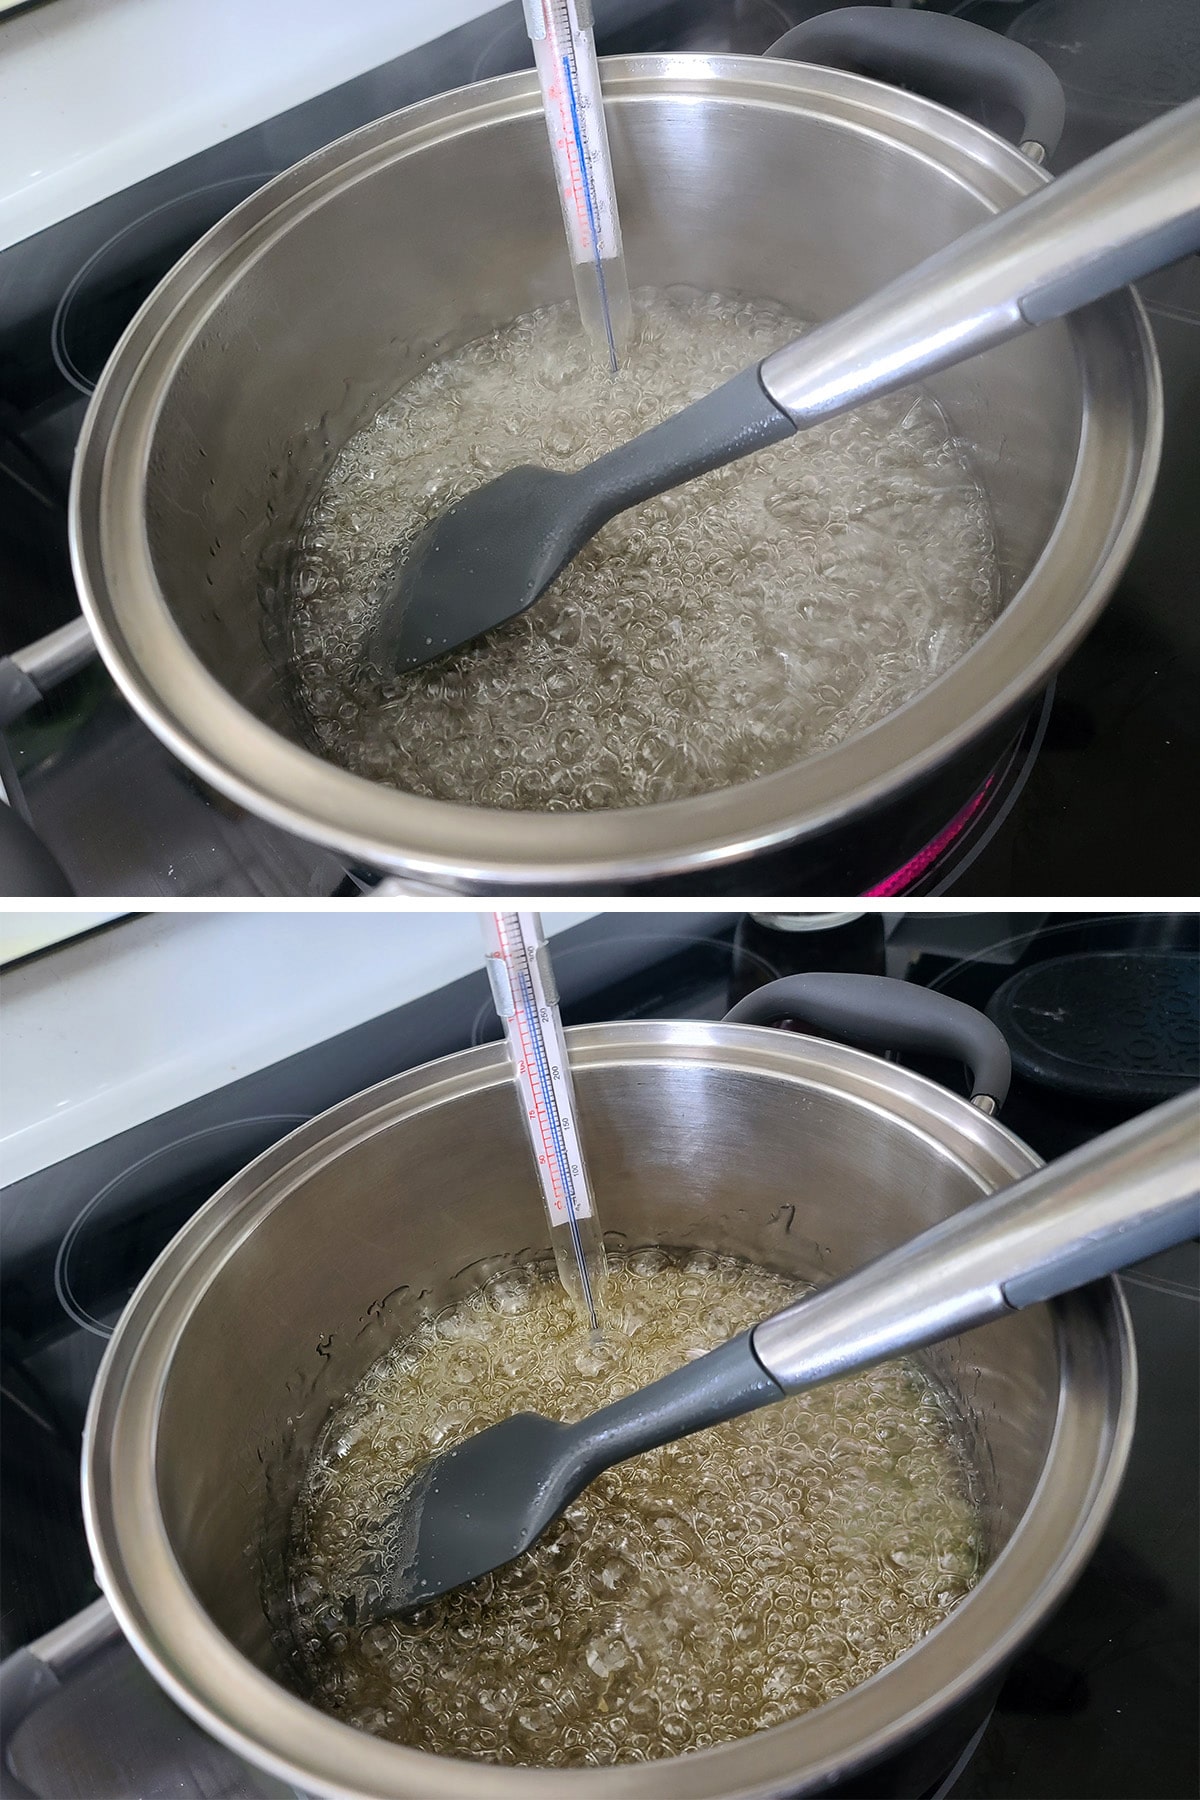 The sugar mixture boiling in a pot, starting to turn golden.